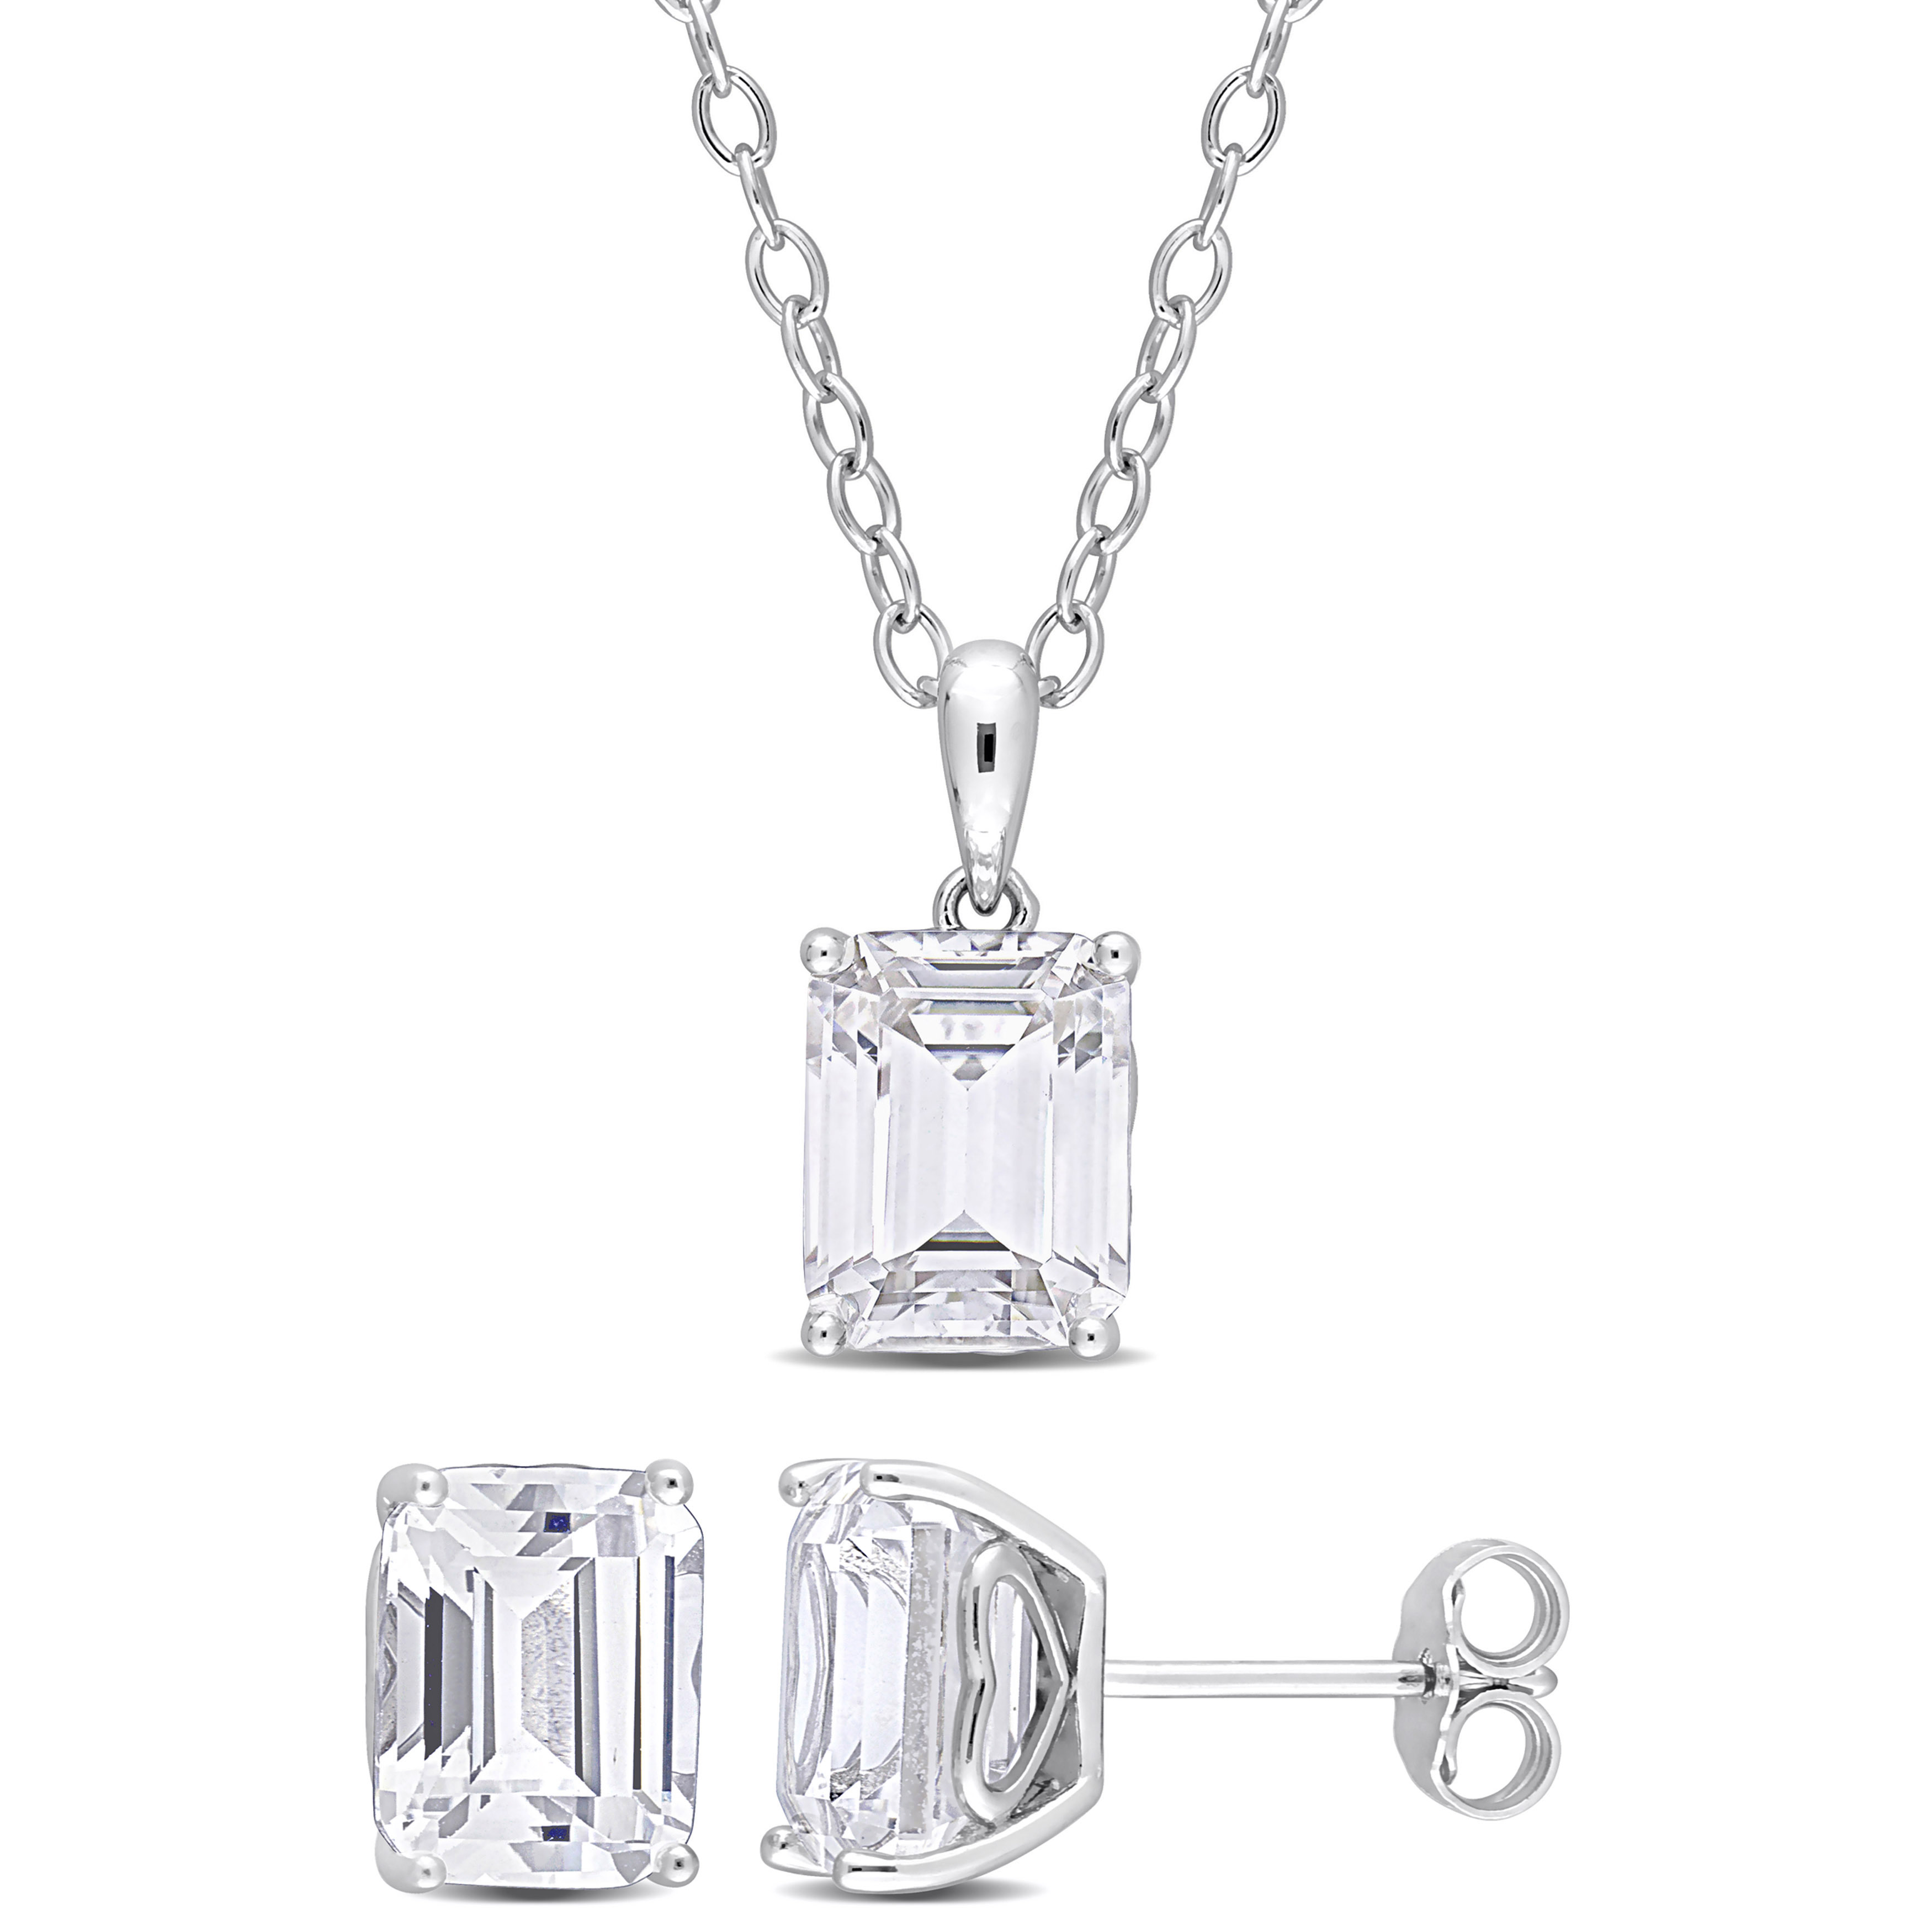 11 3/4 CT TGW Emerald-Cut and Octagon Created White Sapphire 2-Piece Set of Pendant with Chain and Earrings in Sterling Silver